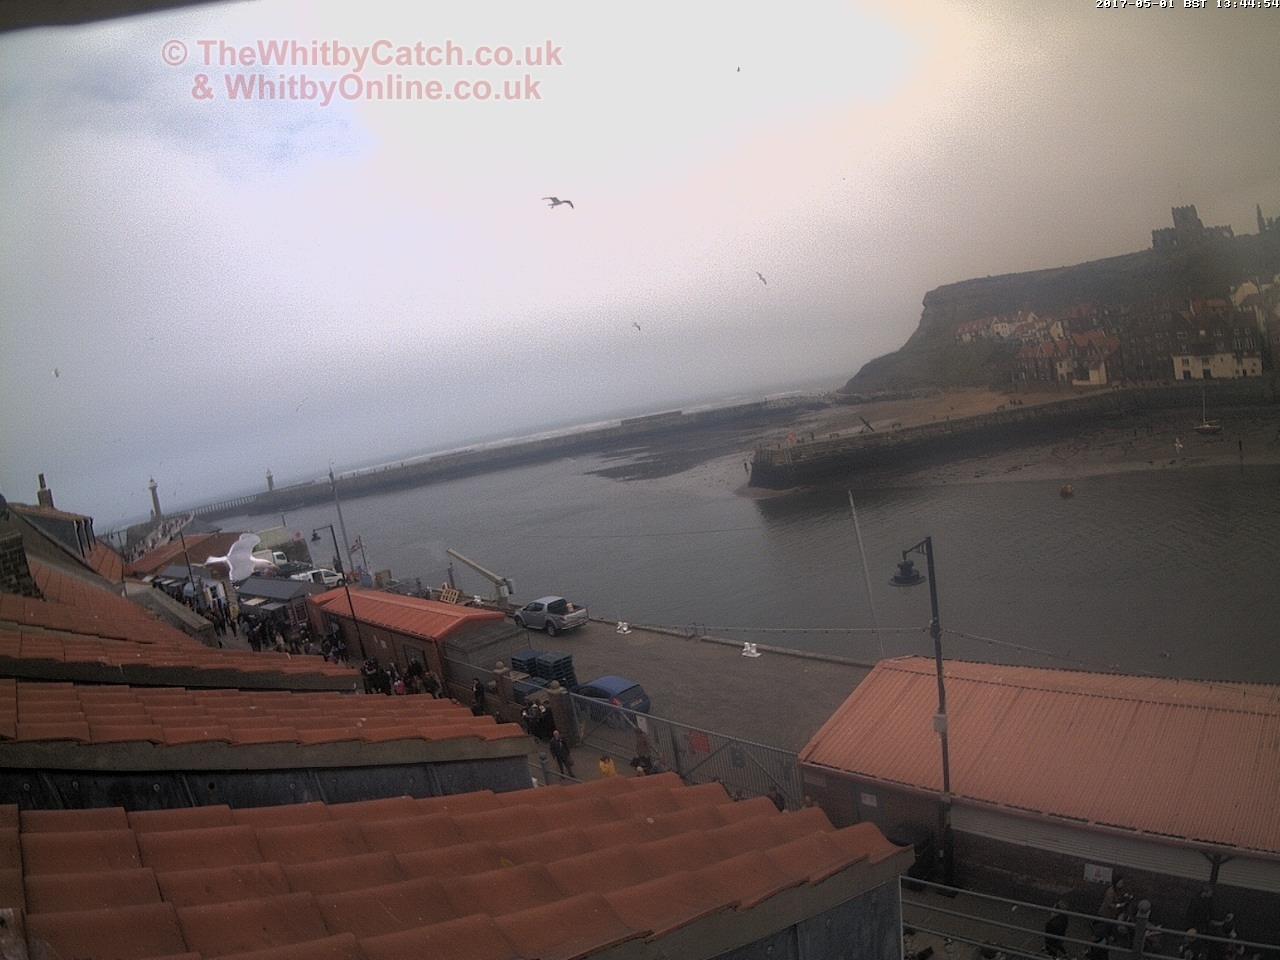 Whitby Mon 1st May 2017 13:45.